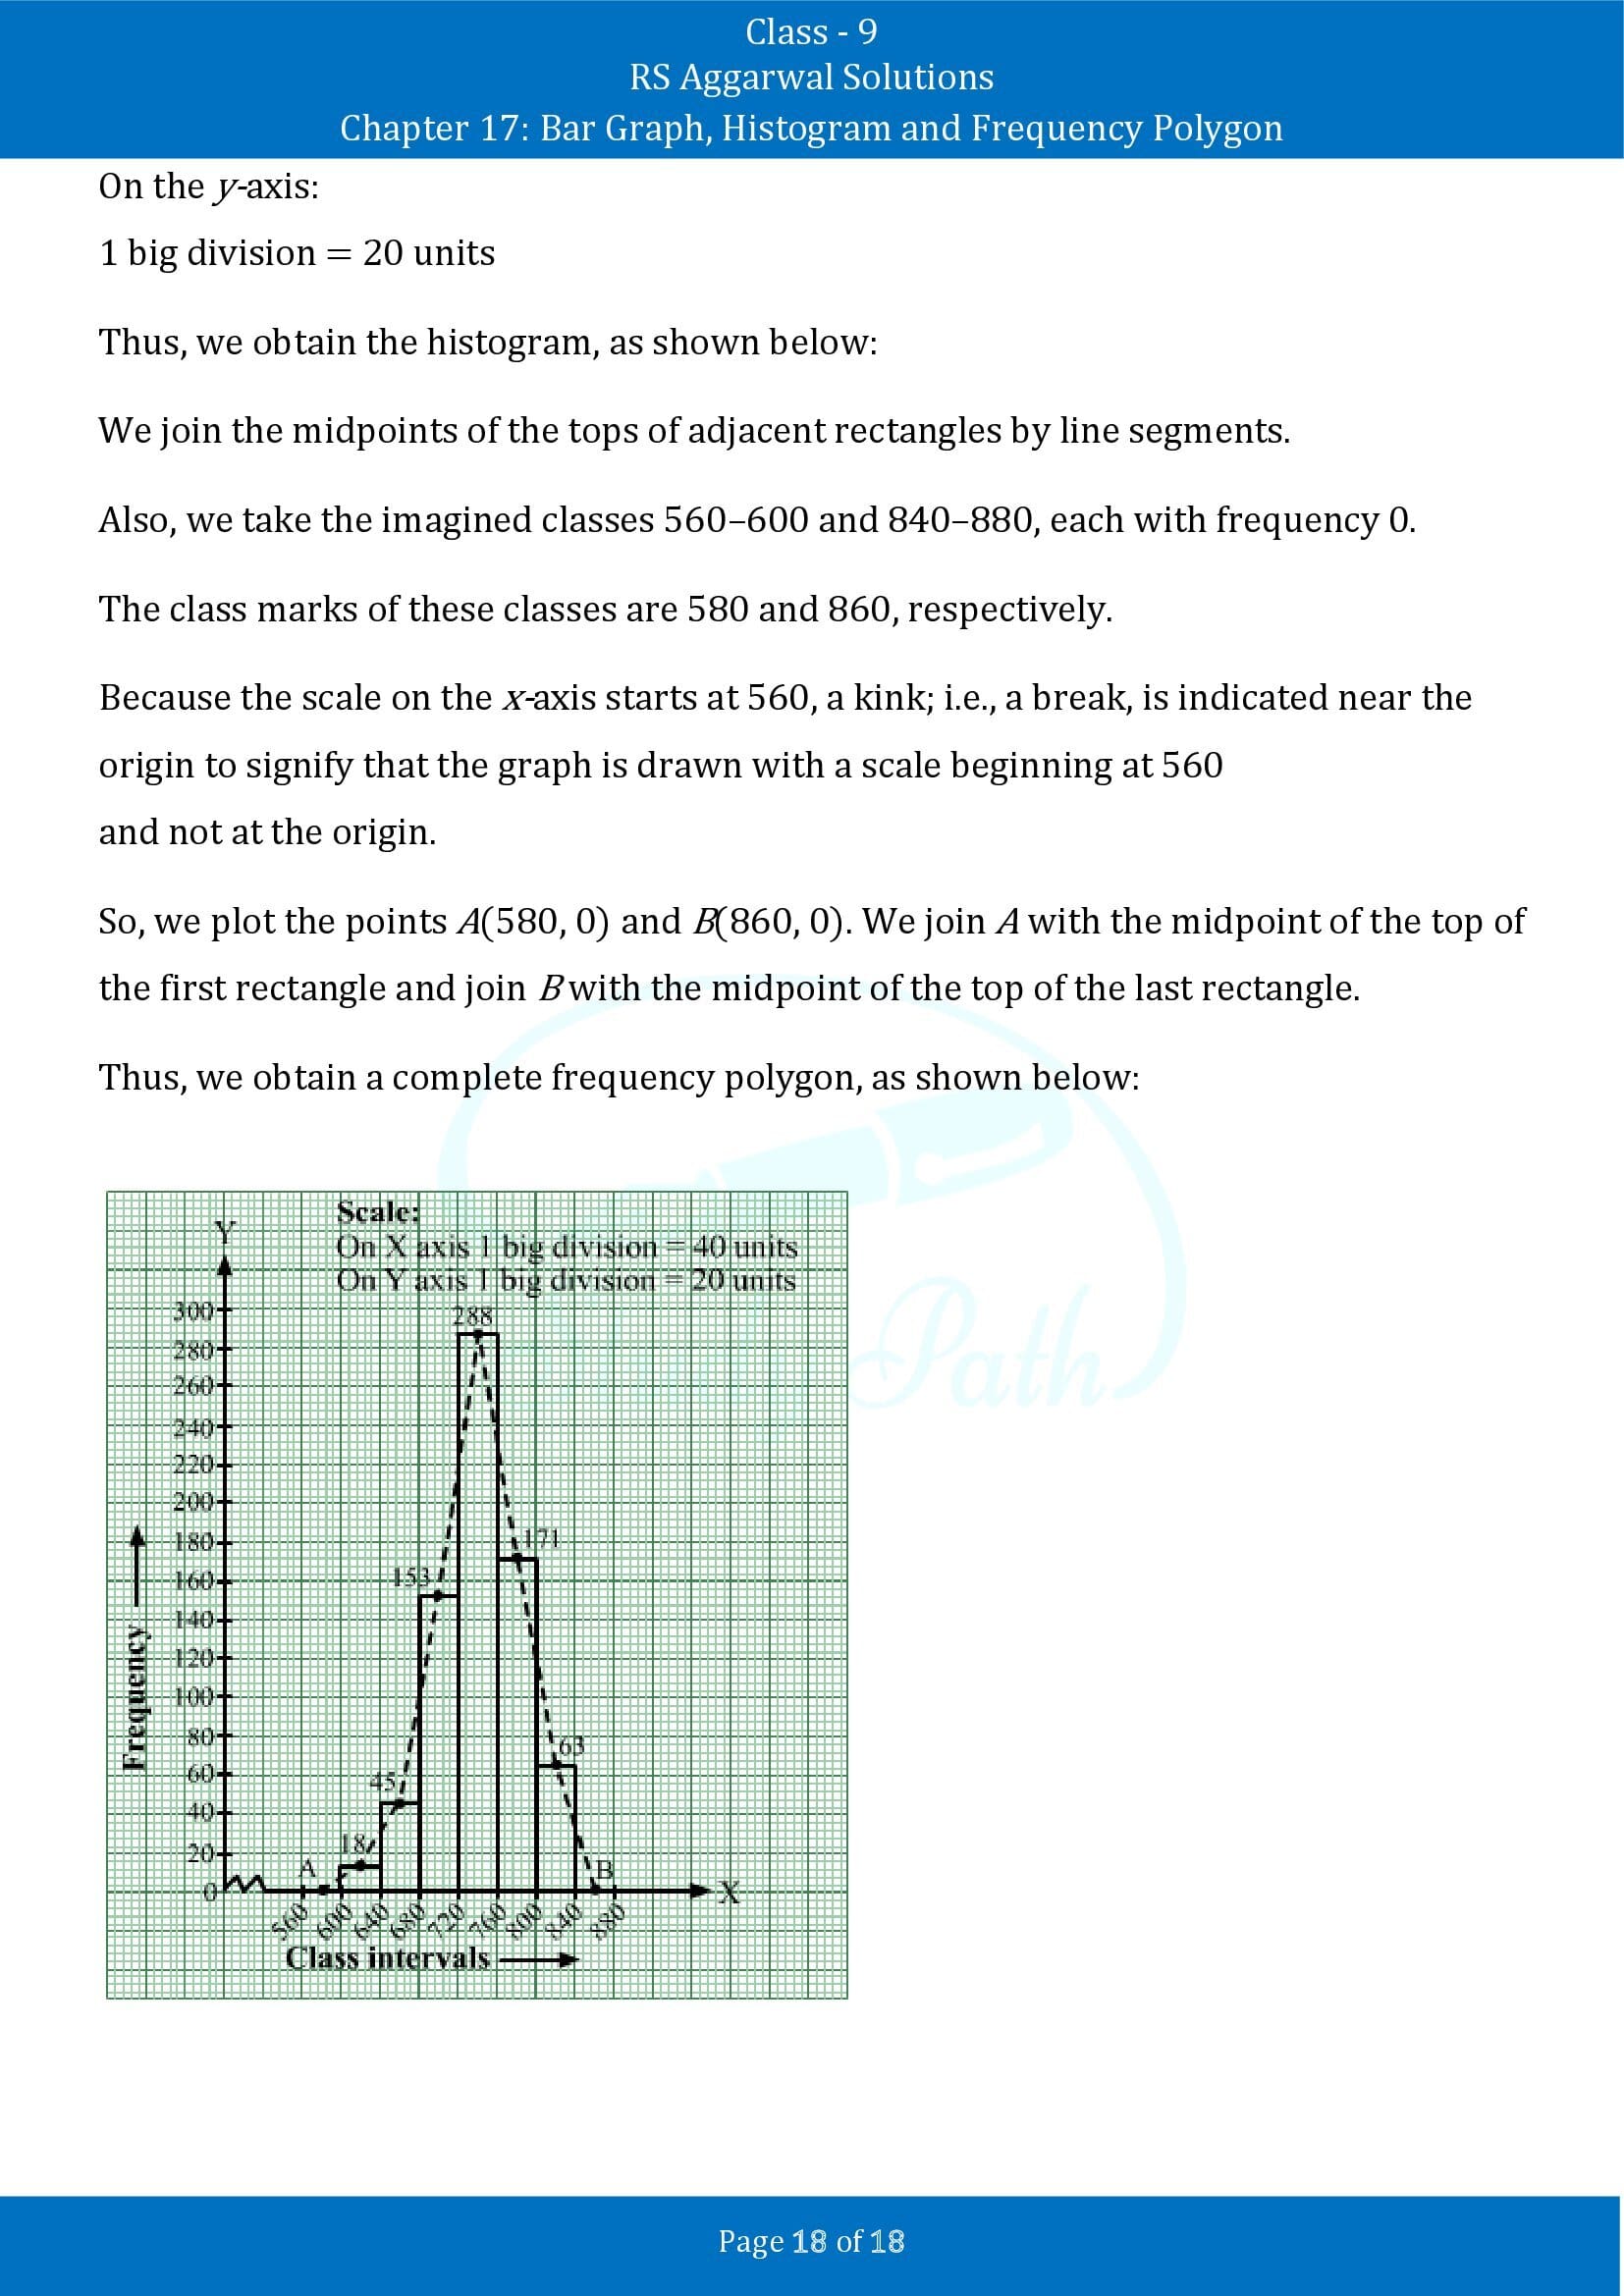 RS Aggarwal Solutions Class 9 Chapter 17 Bar Graph Histogram and Frequency Polygon Exercise 17B 00018